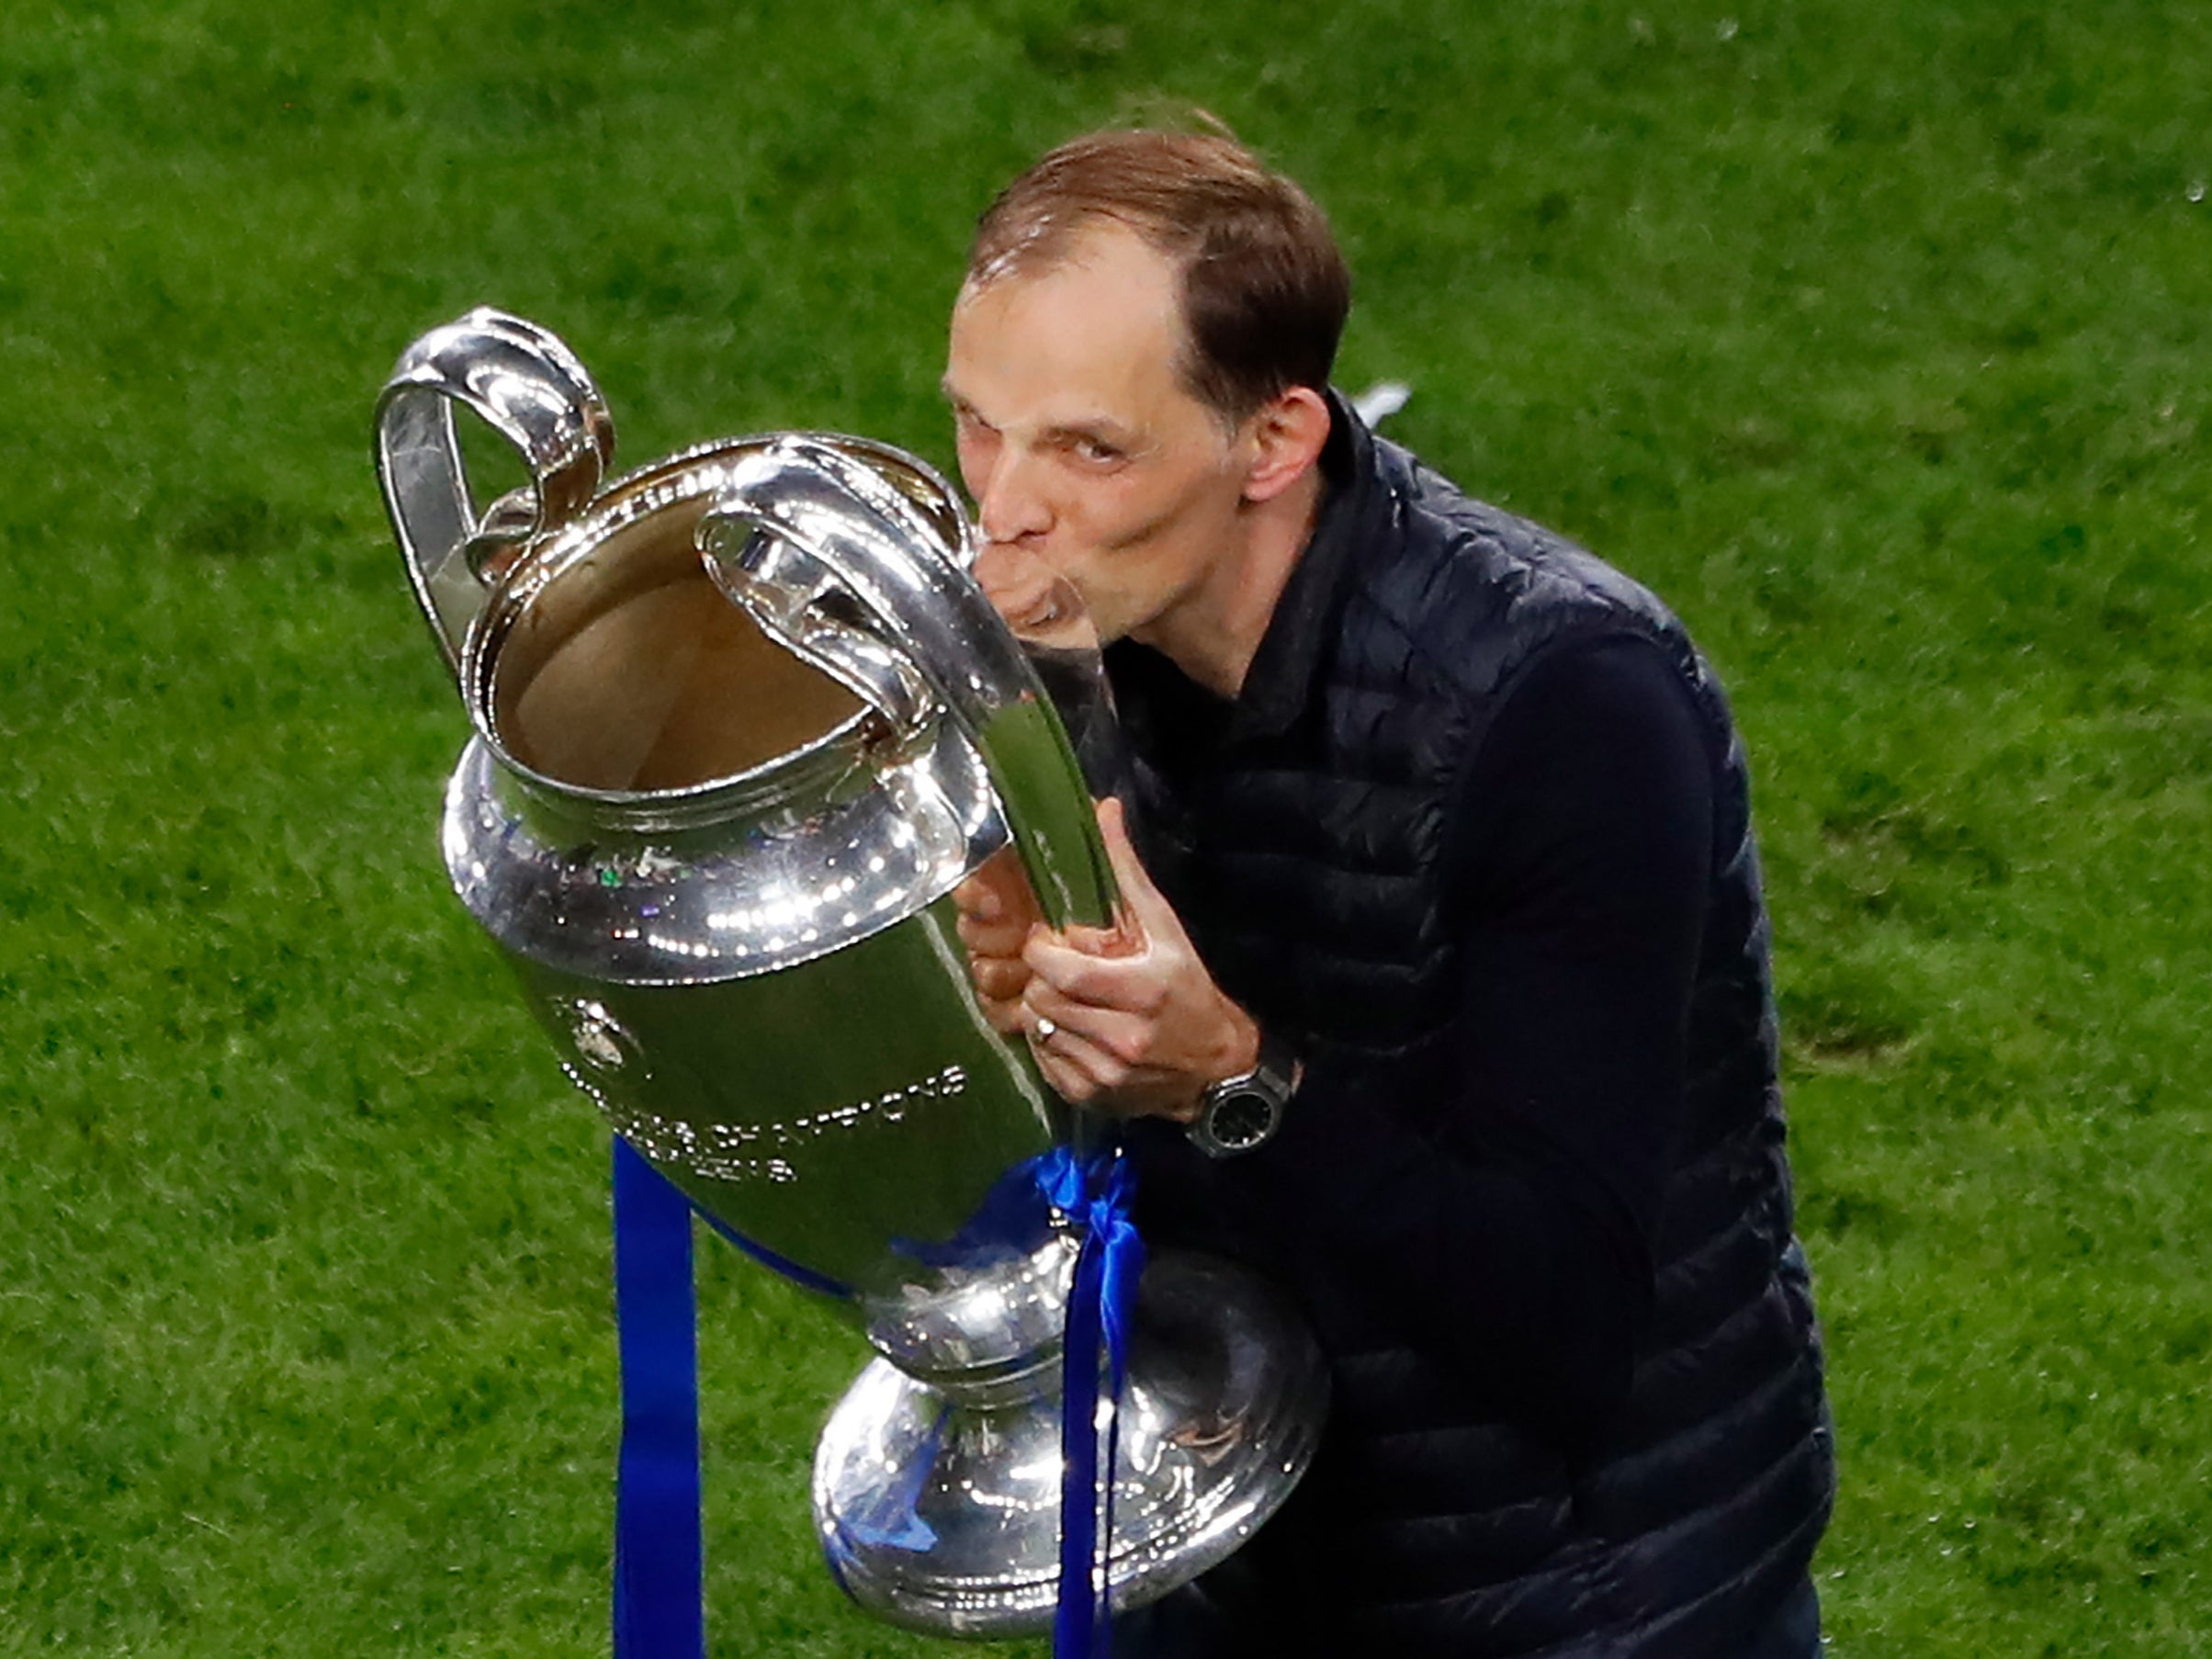 Thomas Tuchel celebrates in Porto after guiding Chelsea to the Champions League title